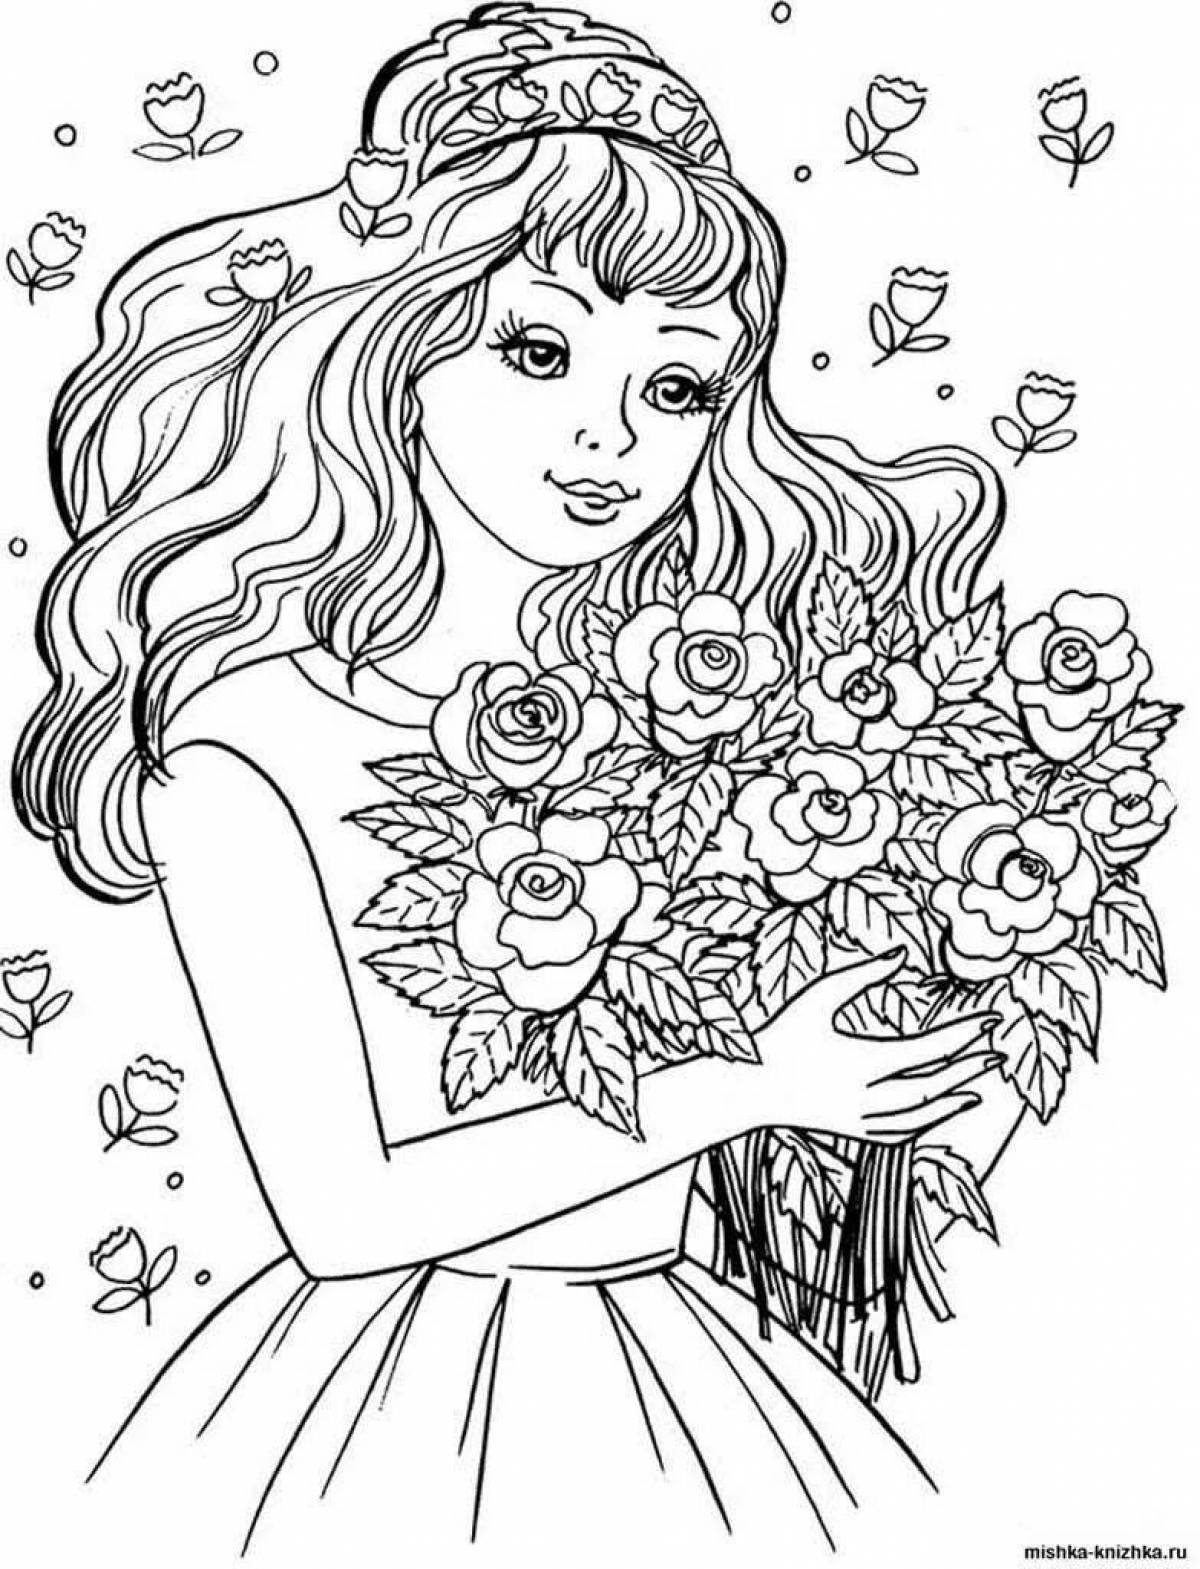 Great coloring book popular with 12 year old girls